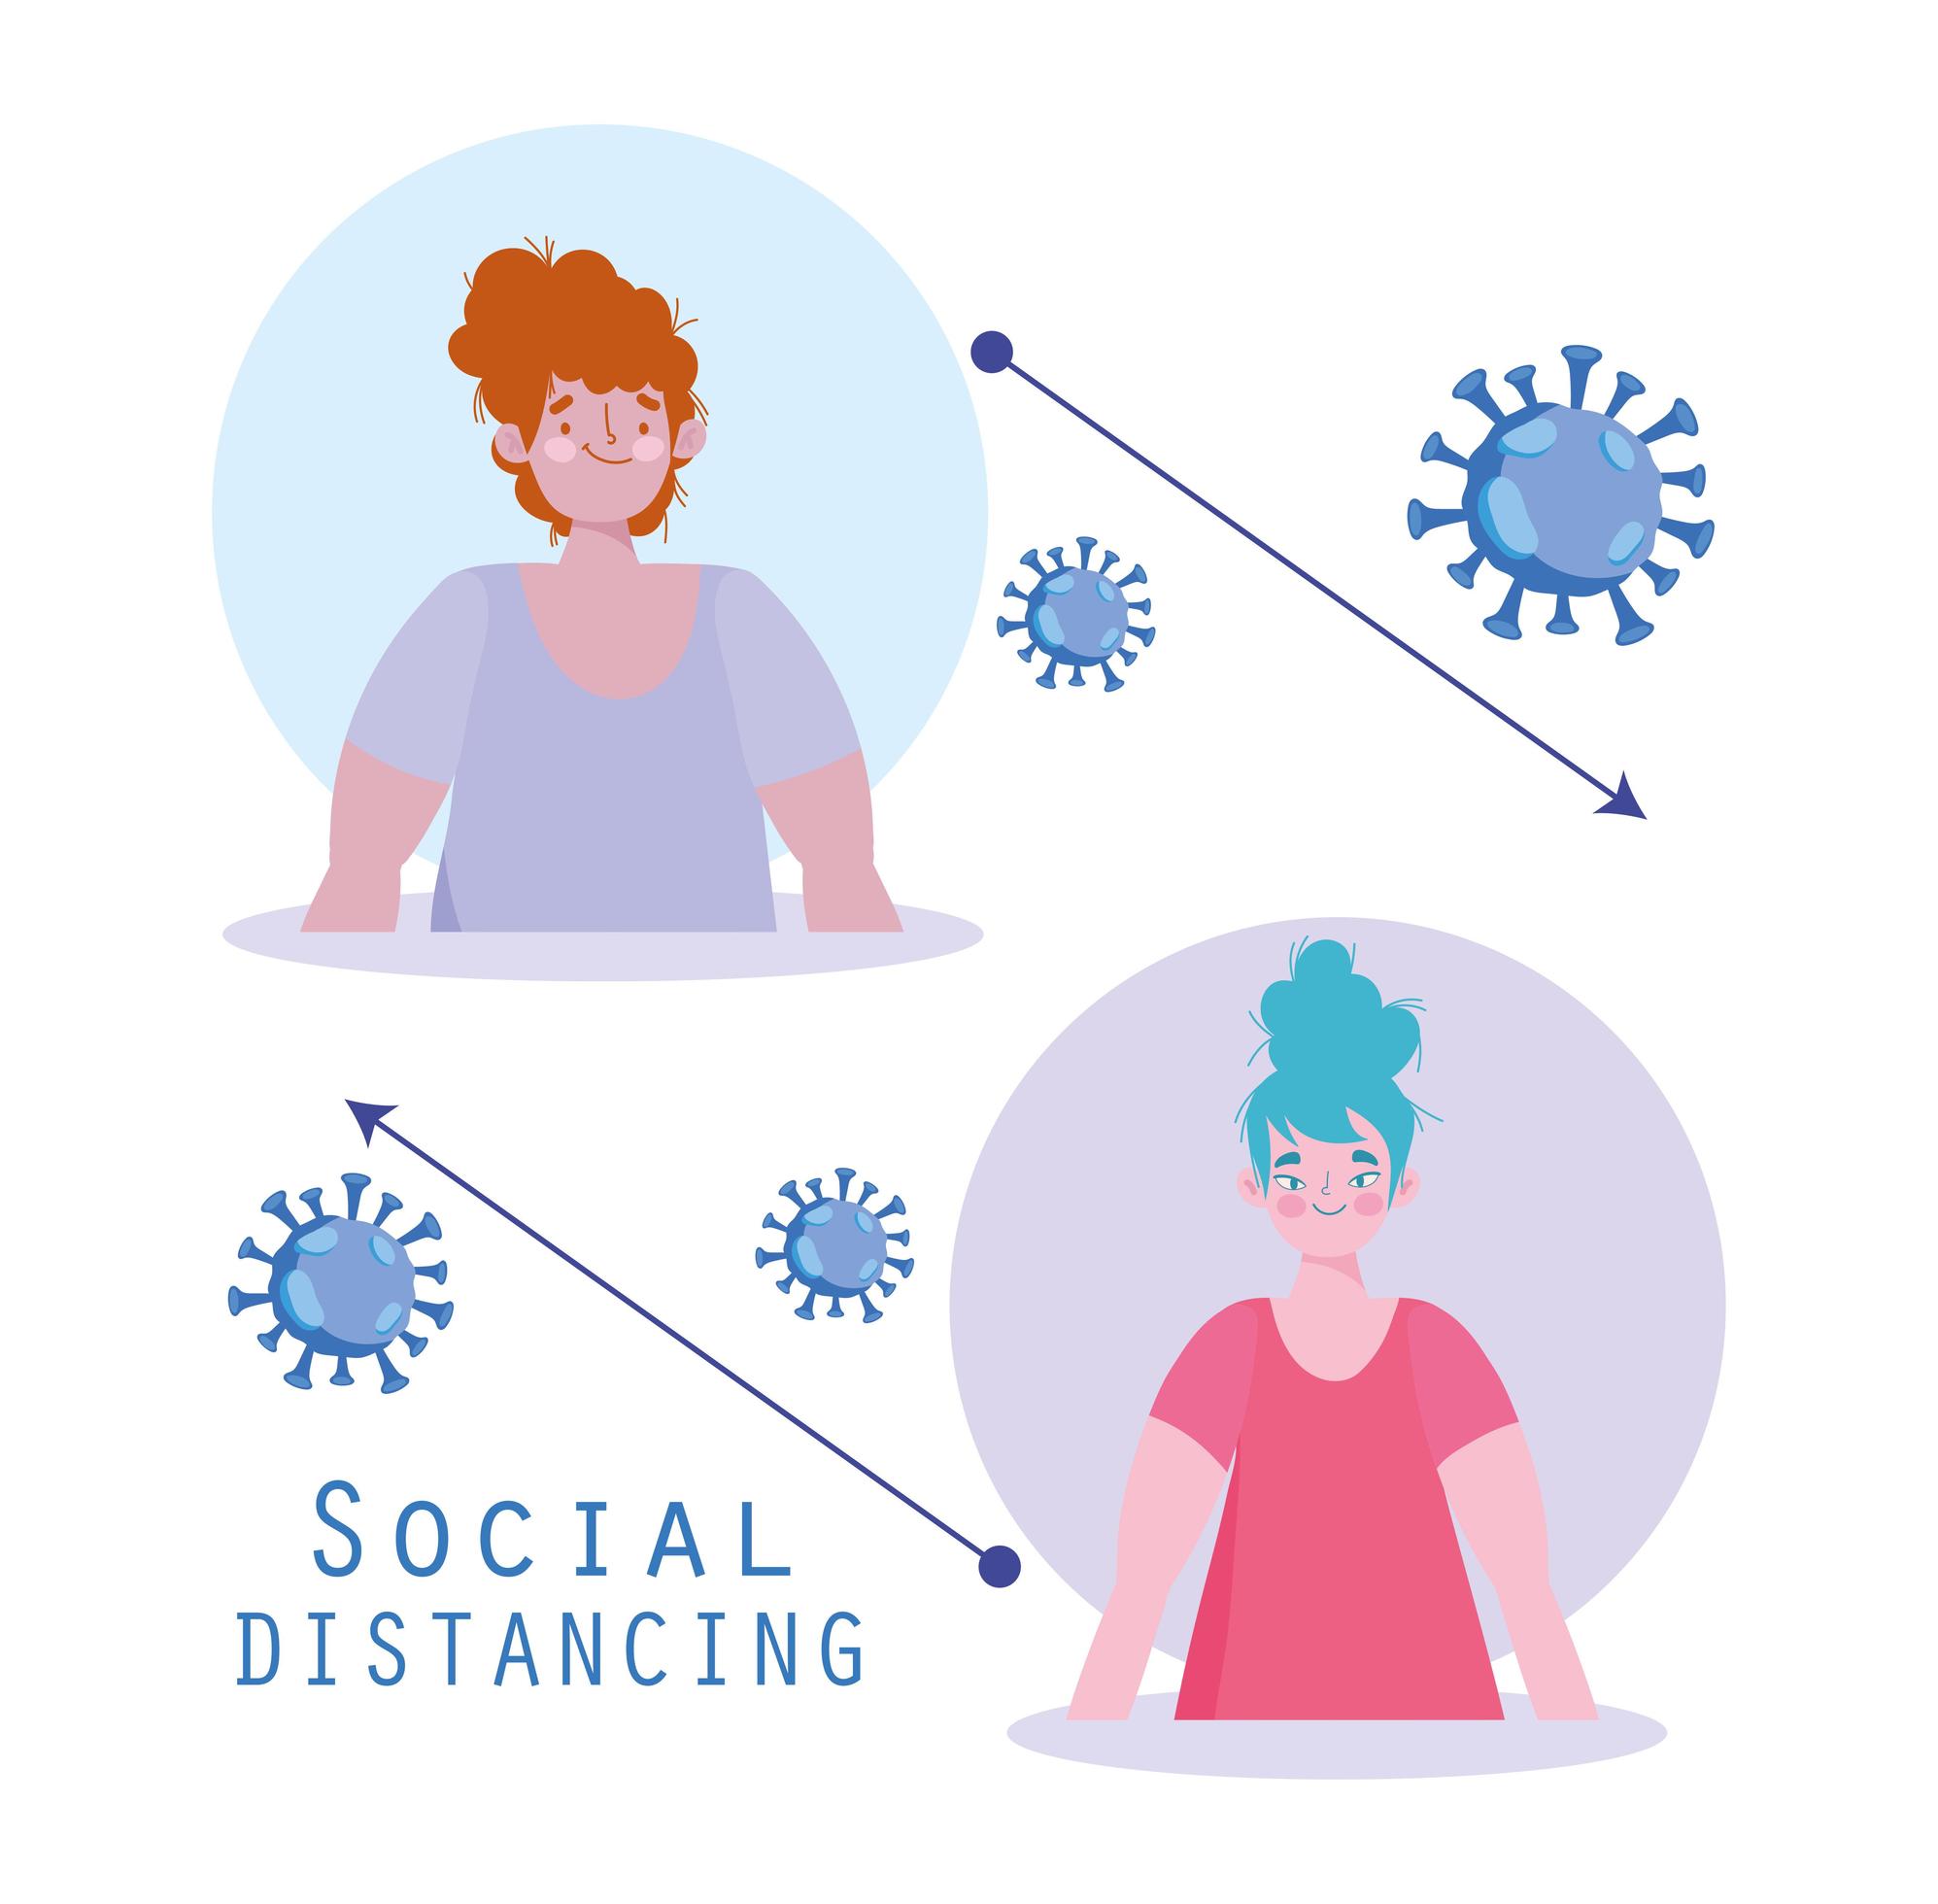 Coronavirus social distancing poster with two women vector